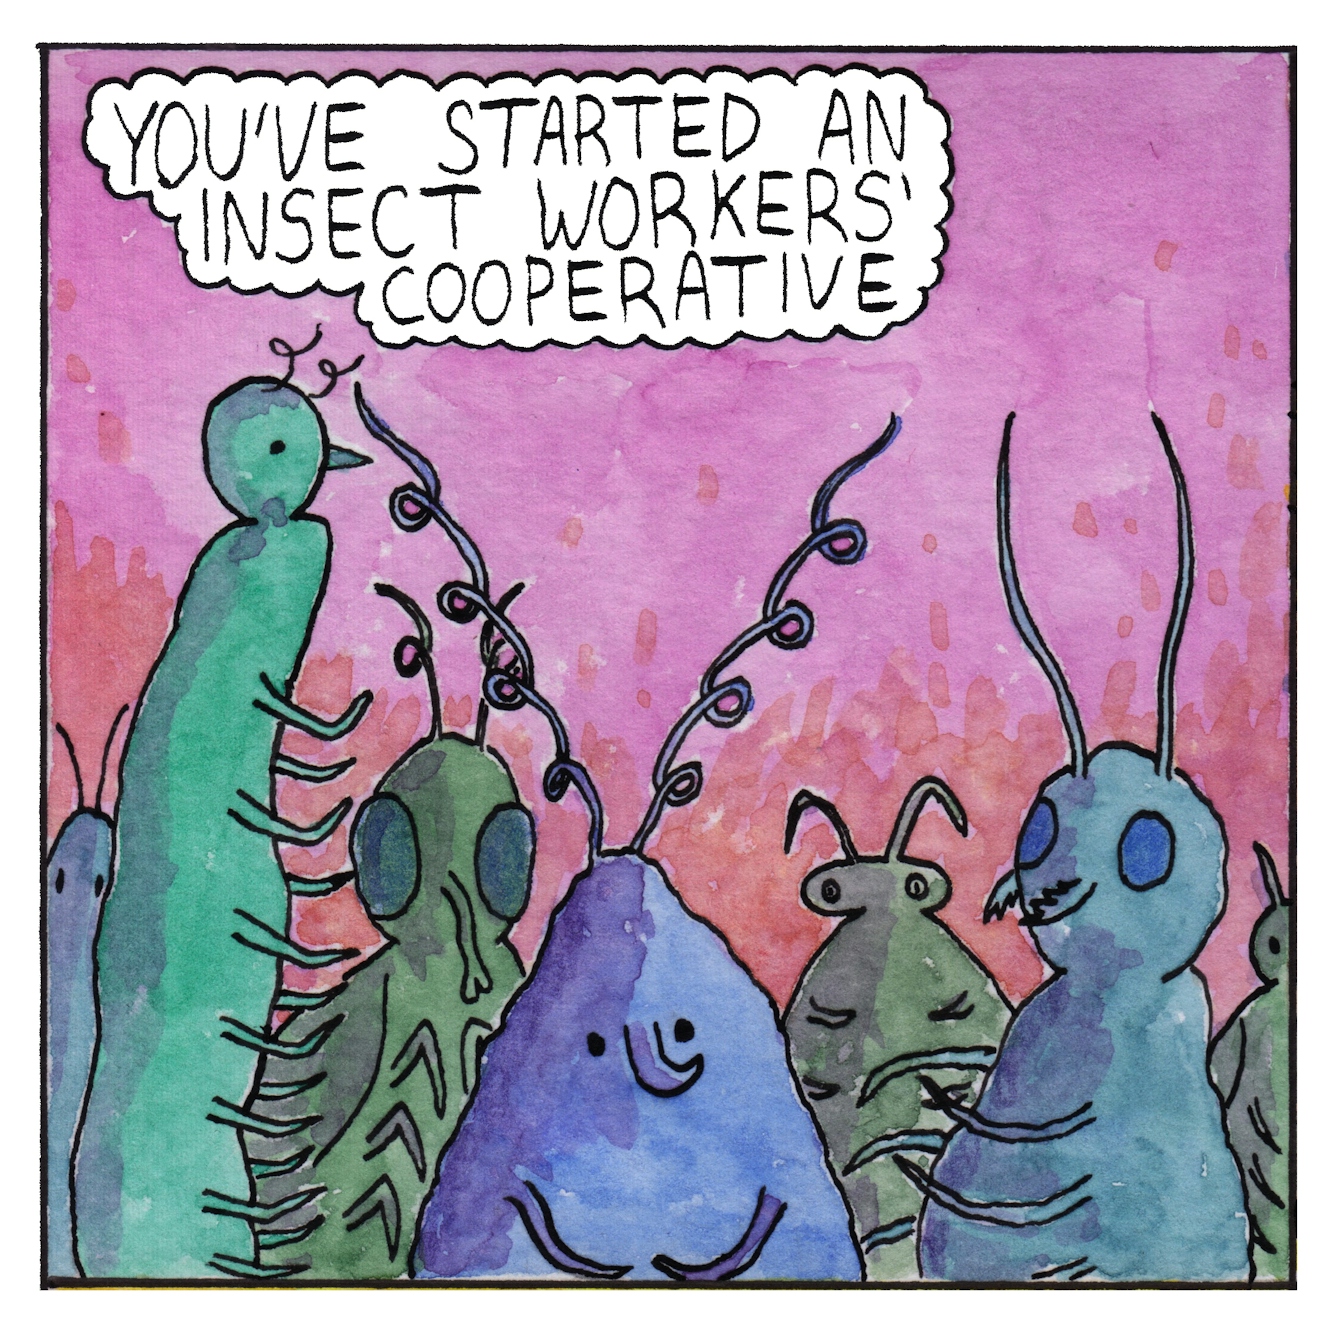 Panel 1 of a six-panel comic made with ink, watercolour and colour pencils: A group of blue and green bugs, with various shapes and sizes of body and antennae, some with huge disc-like eyes, others with small dots for eyes, look out of the frame at the viewer. A bubble of text above them reads: “You’ve started an insect workers’ cooperative”